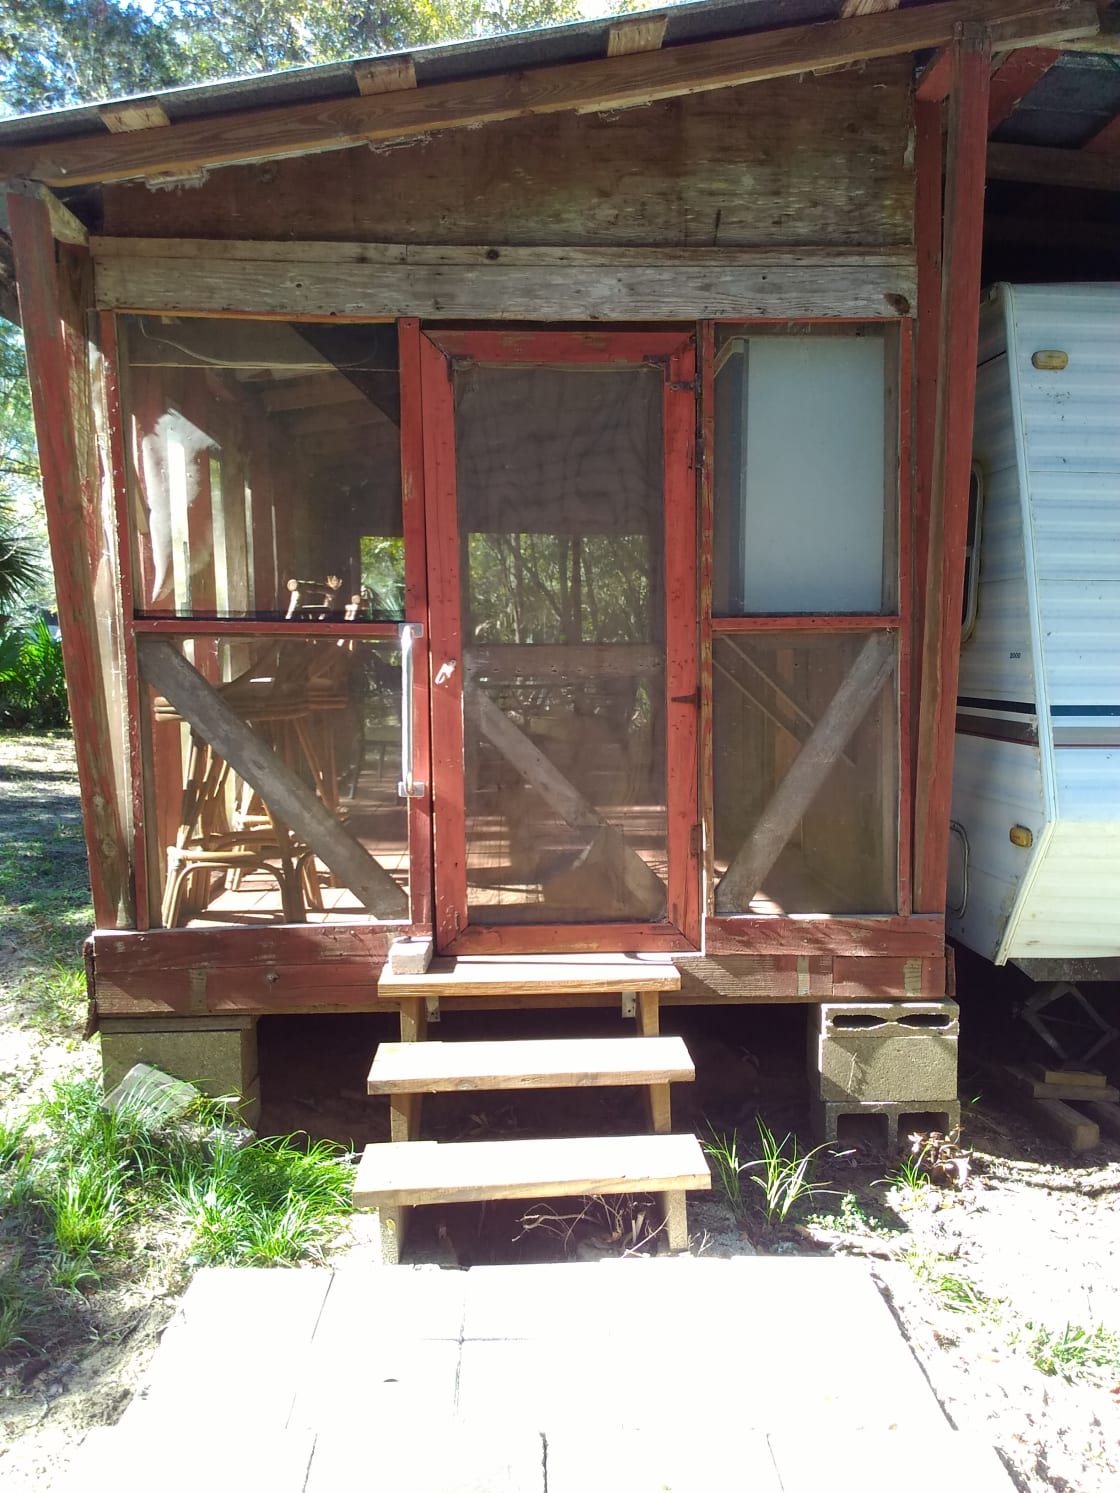 50 + year old screened in porch